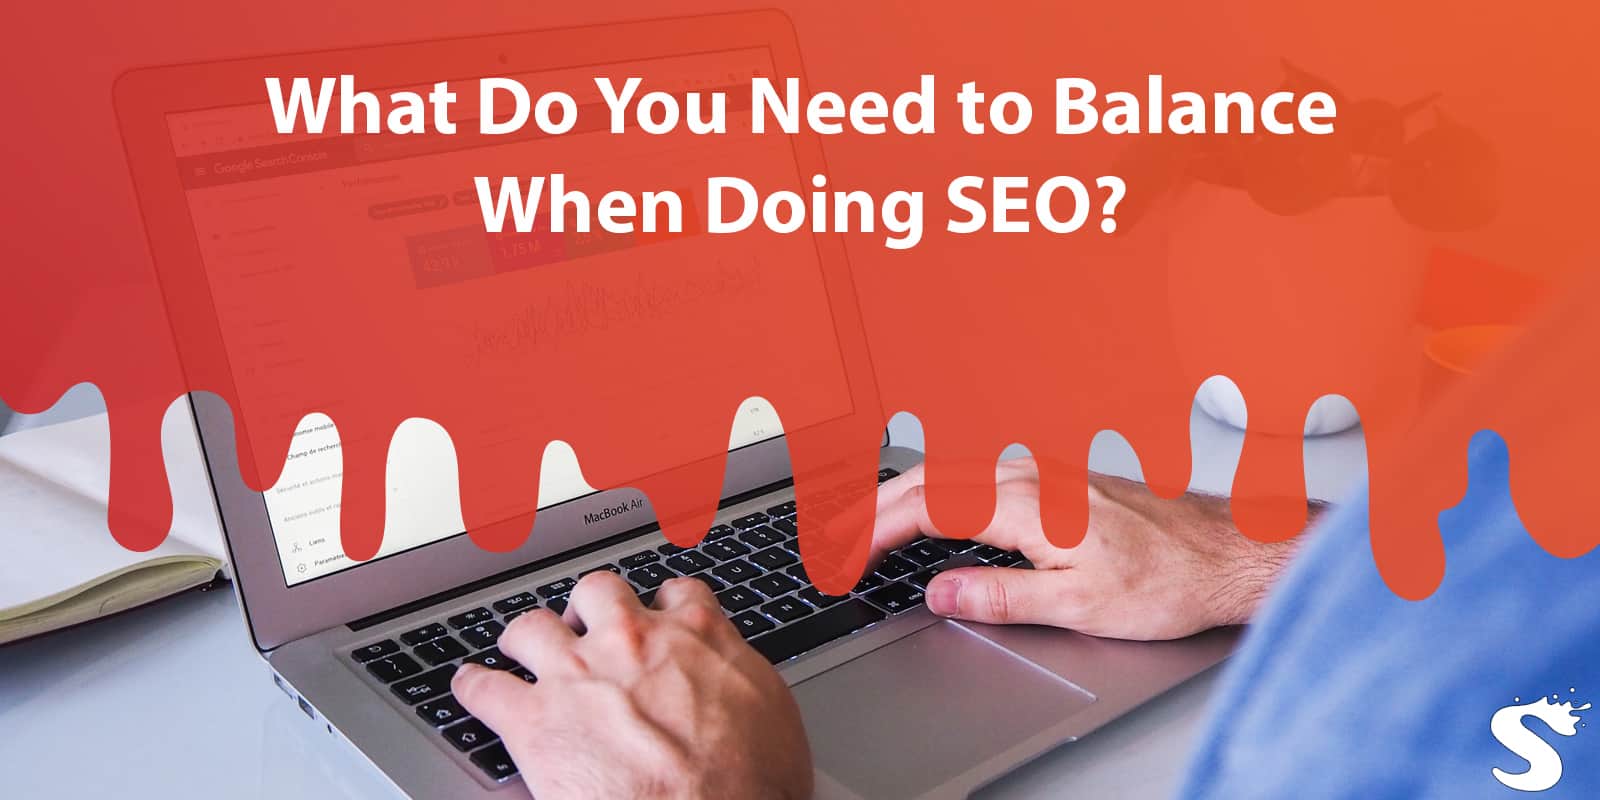 What Do You Need to Balance When Doing SEO?